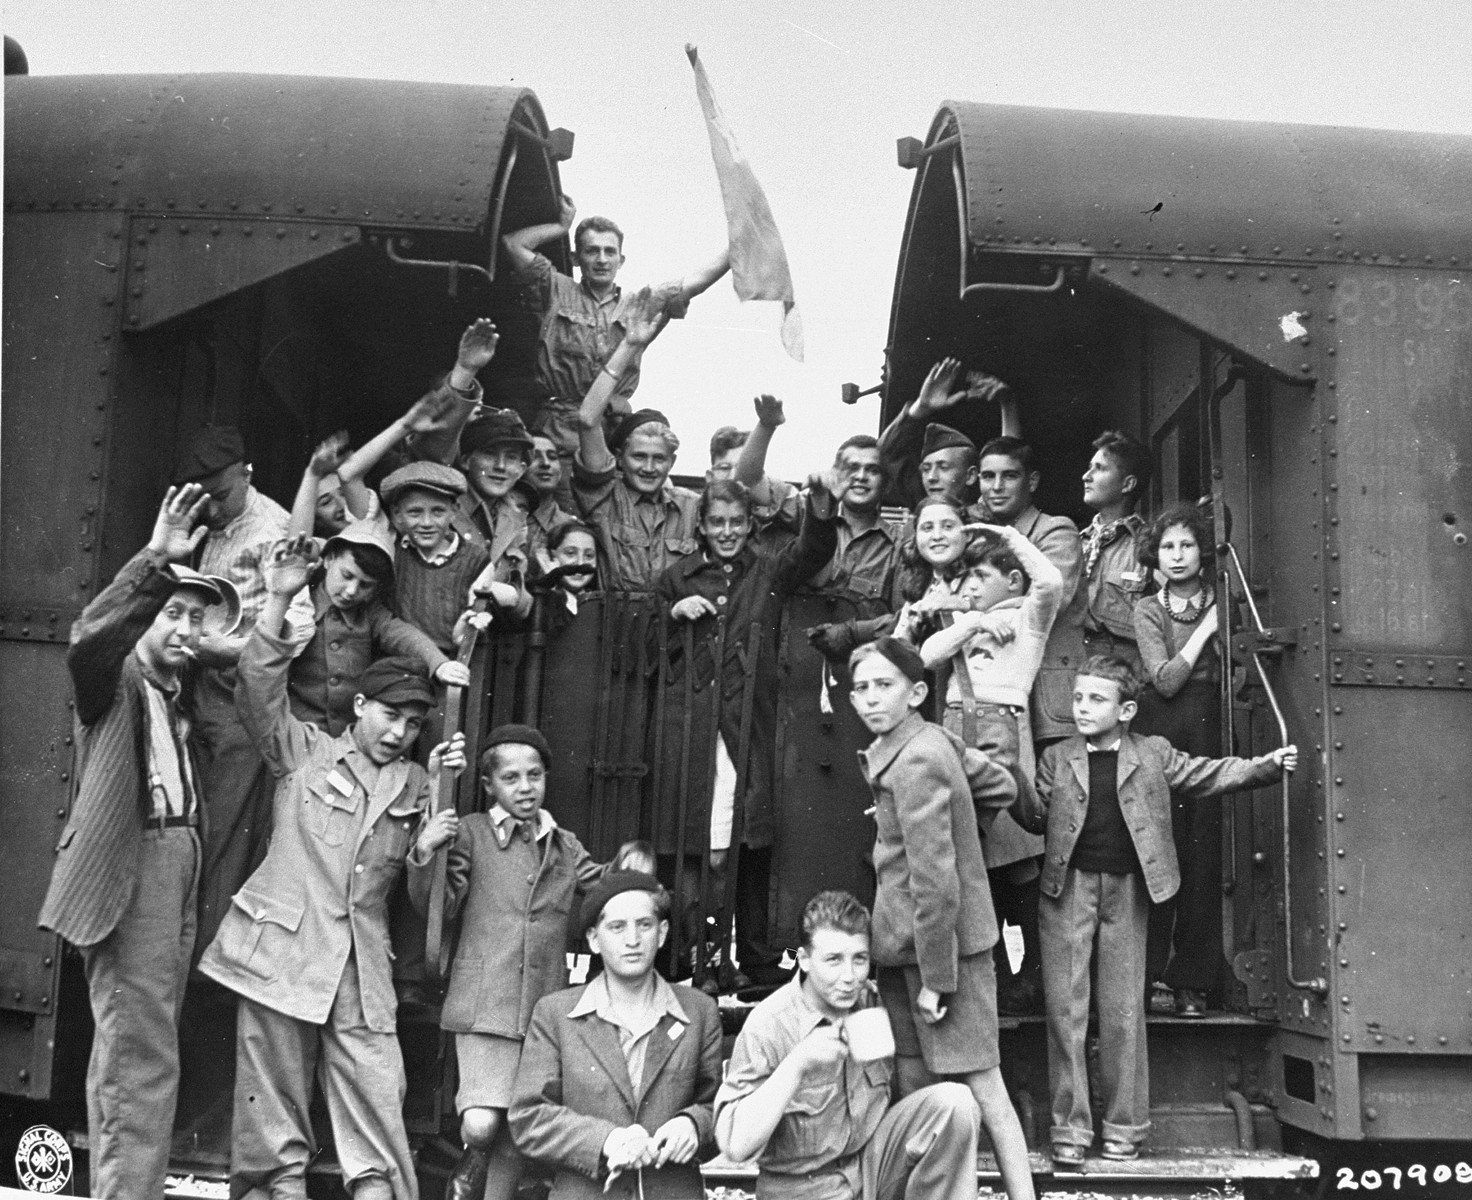 A group of Jewish children wave goodbye as they depart by train from the Buchenwald concentration camp. 

The original caption reads, "A group of Jewish children wave good bye to friends at the Buchenwald concentration camp.  They have been recently released and are on their way to France; from there some will go to Palestine, some to the U.S."